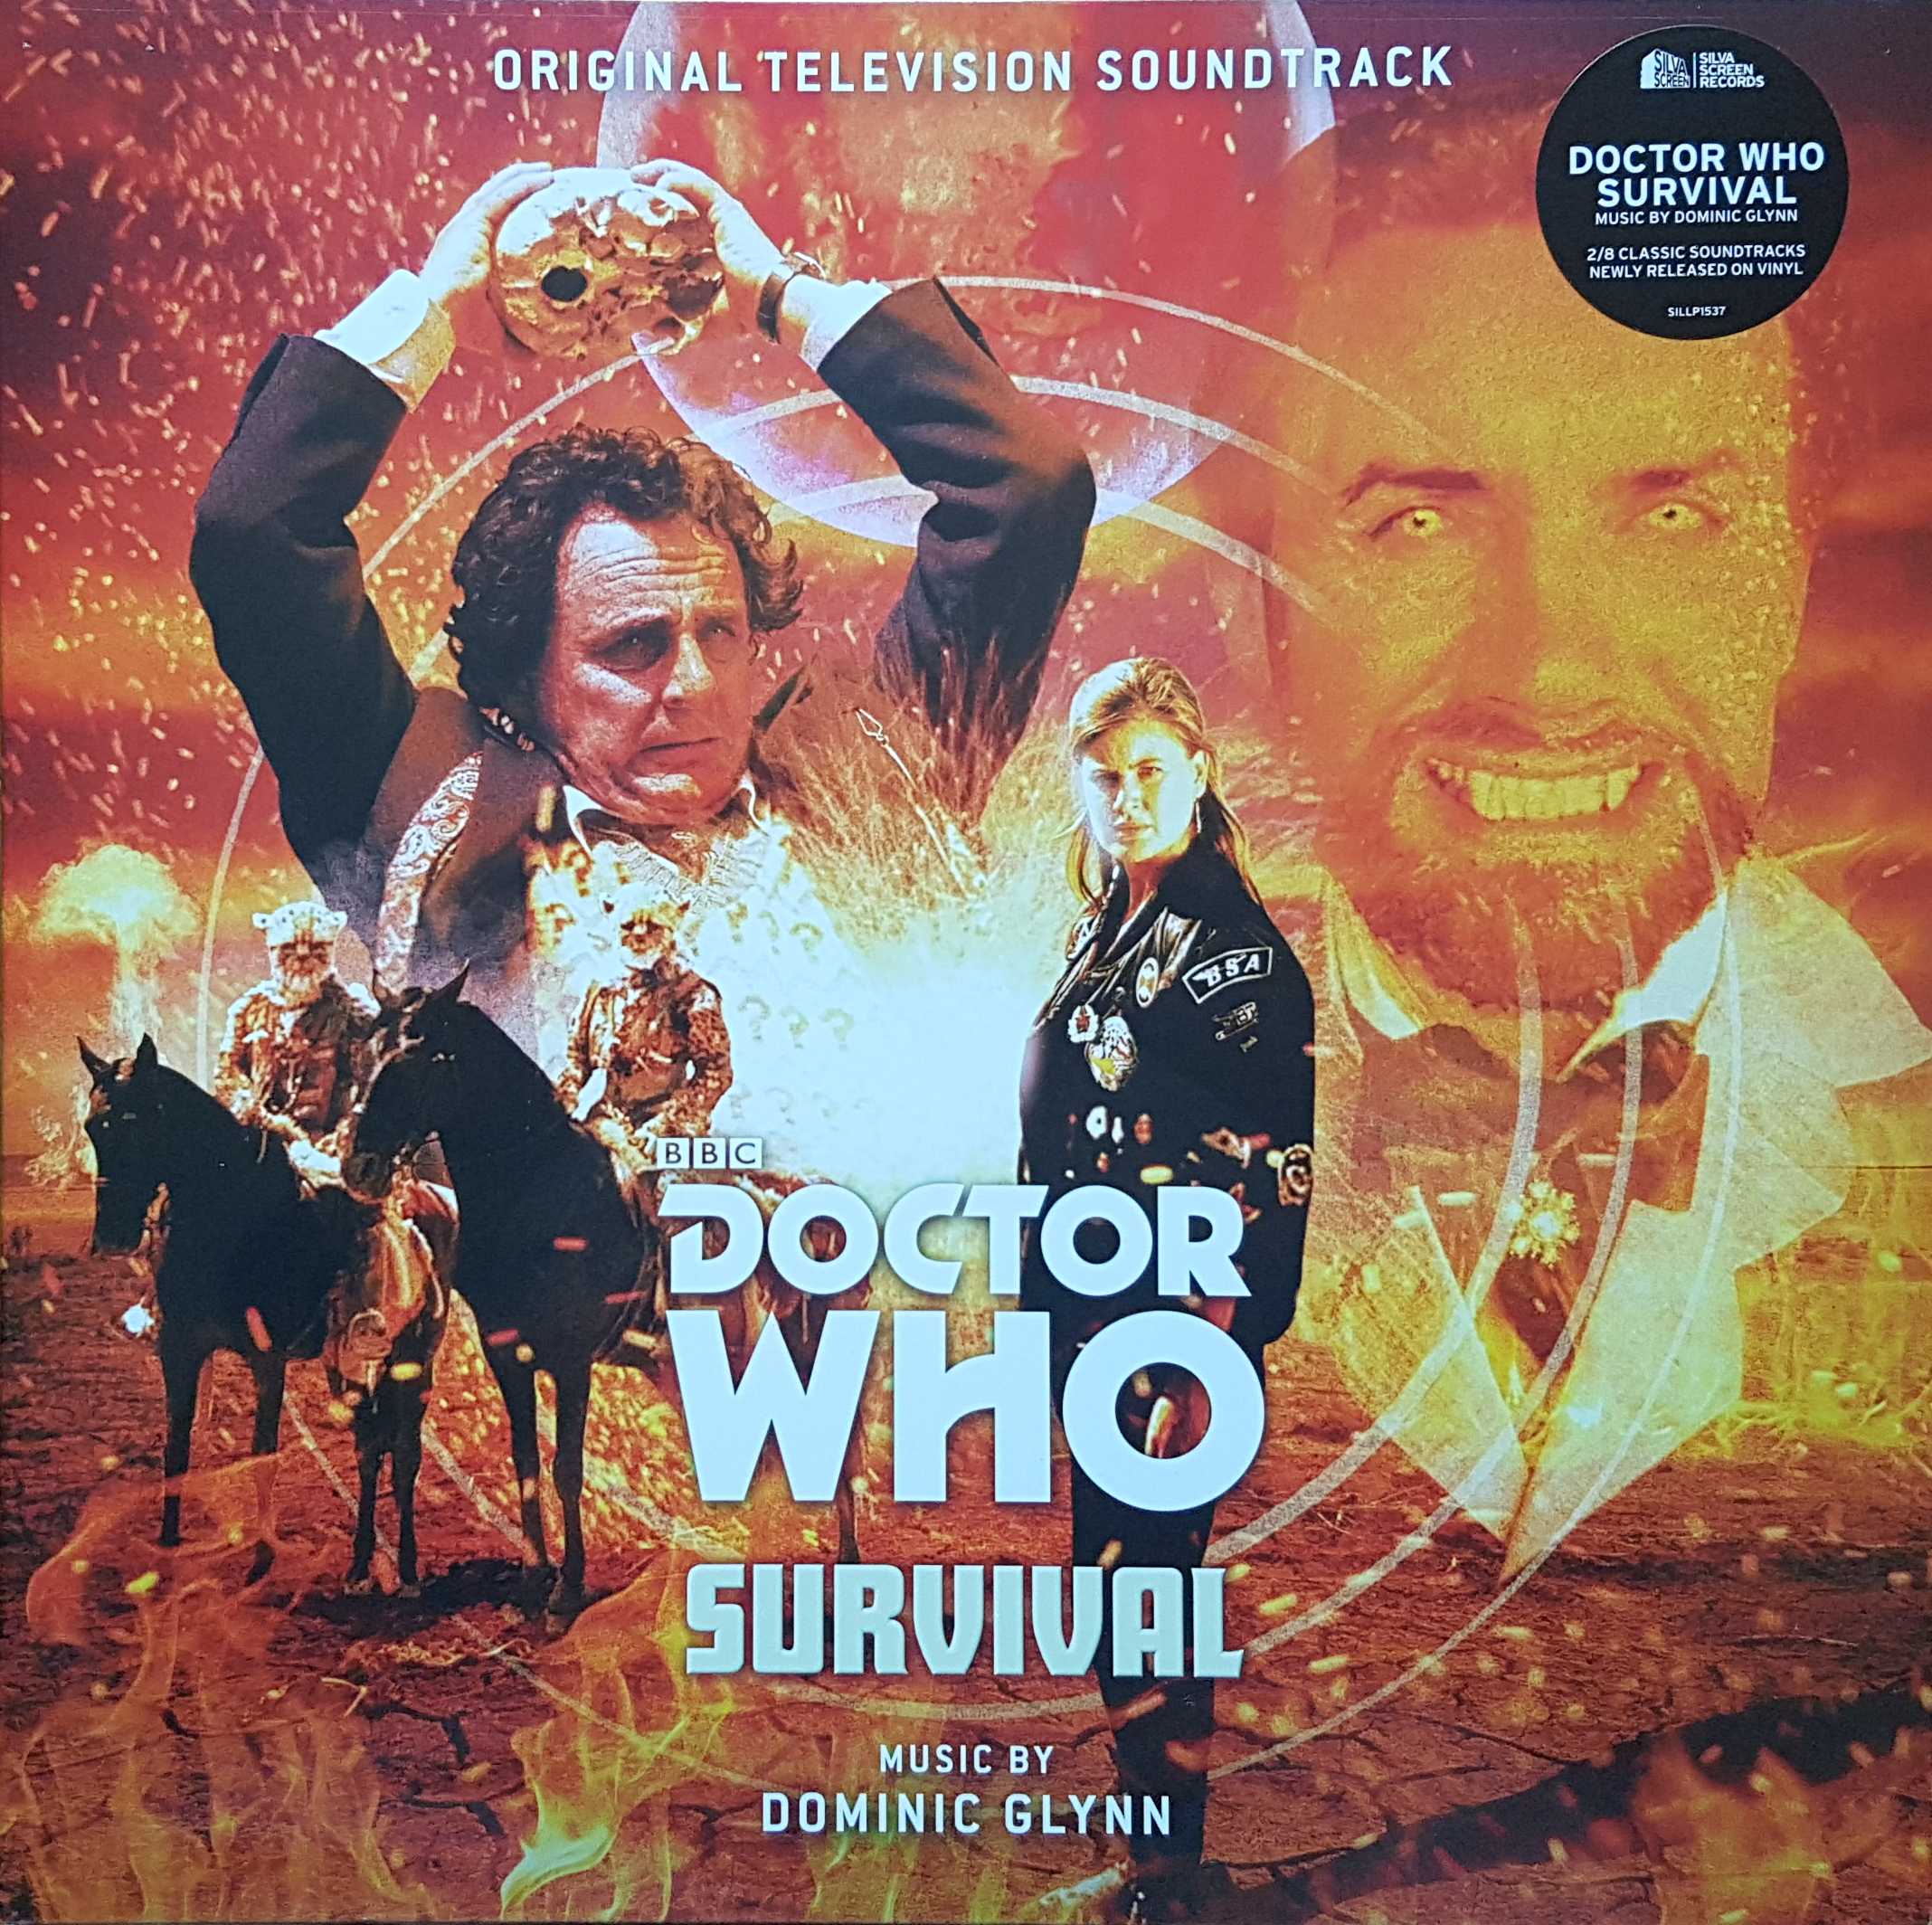 Picture of Doctor Who - Survival by artist Dominic Glynn from the BBC albums - Records and Tapes library